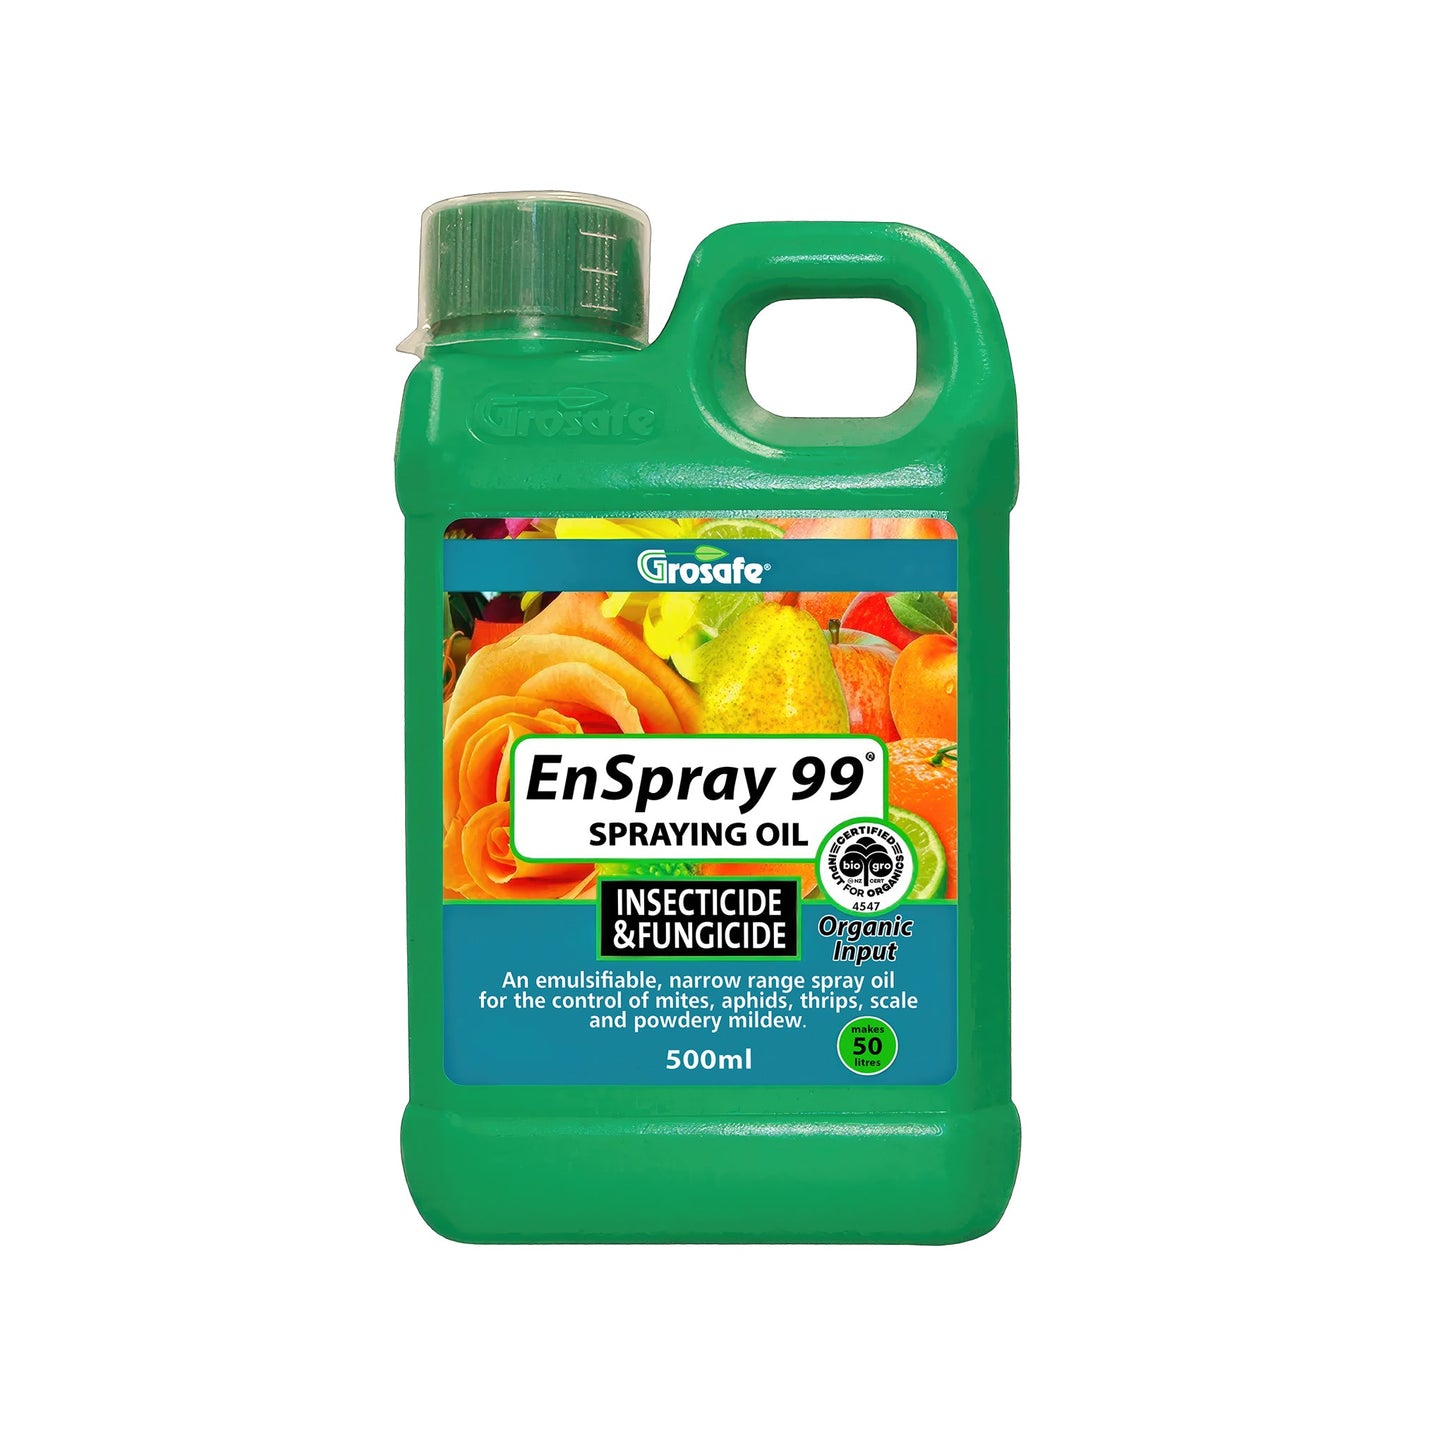 Grosafe EnSpray 99 Spraying Oil - Insecticide